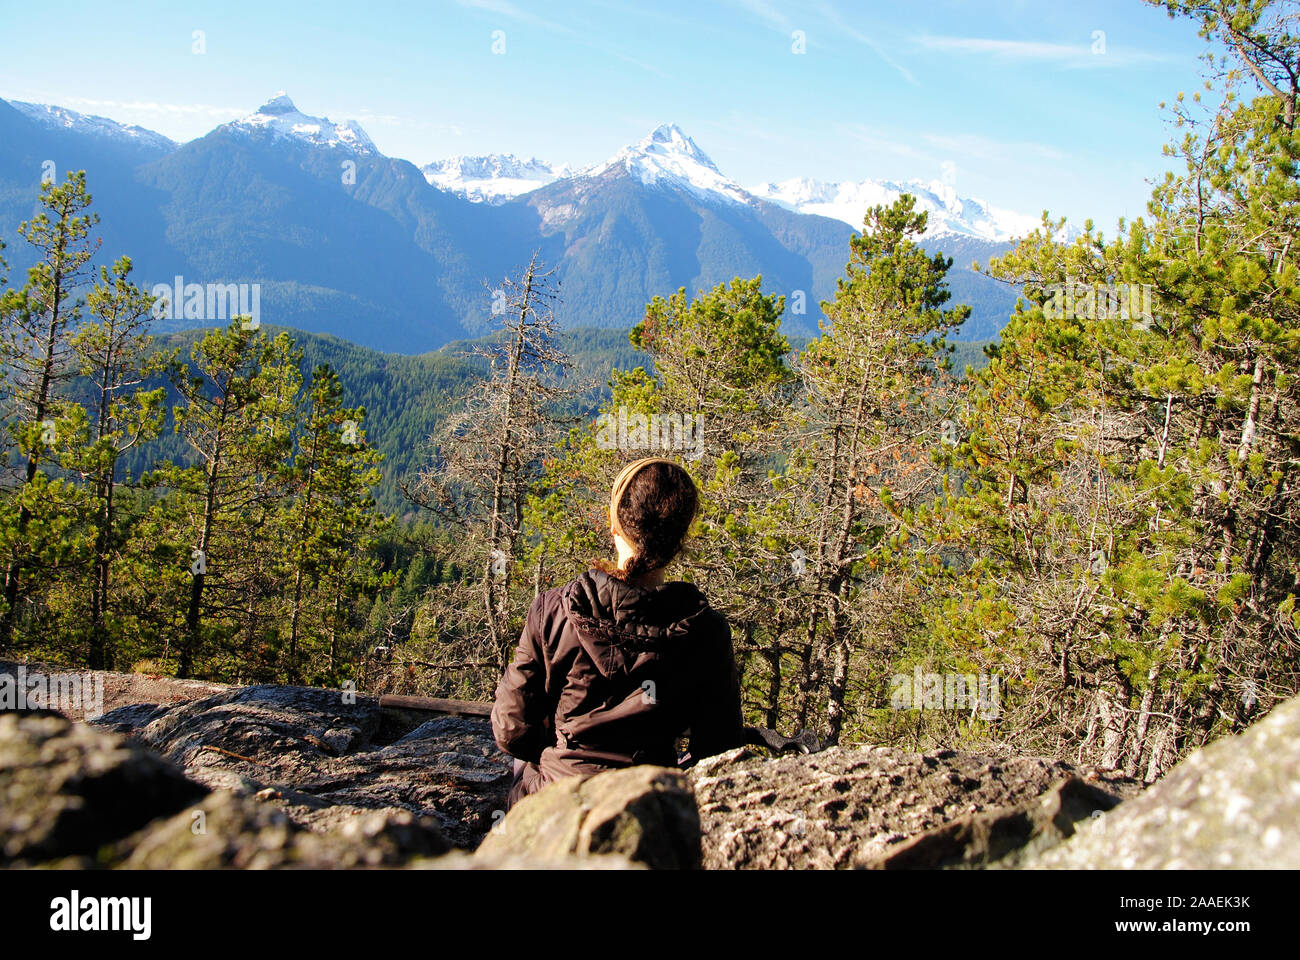 A natural young woman with brown braided hair, sitting still on rocks in a contemplative posture, staring at the snow capped Tantalus mountain range Stock Photo